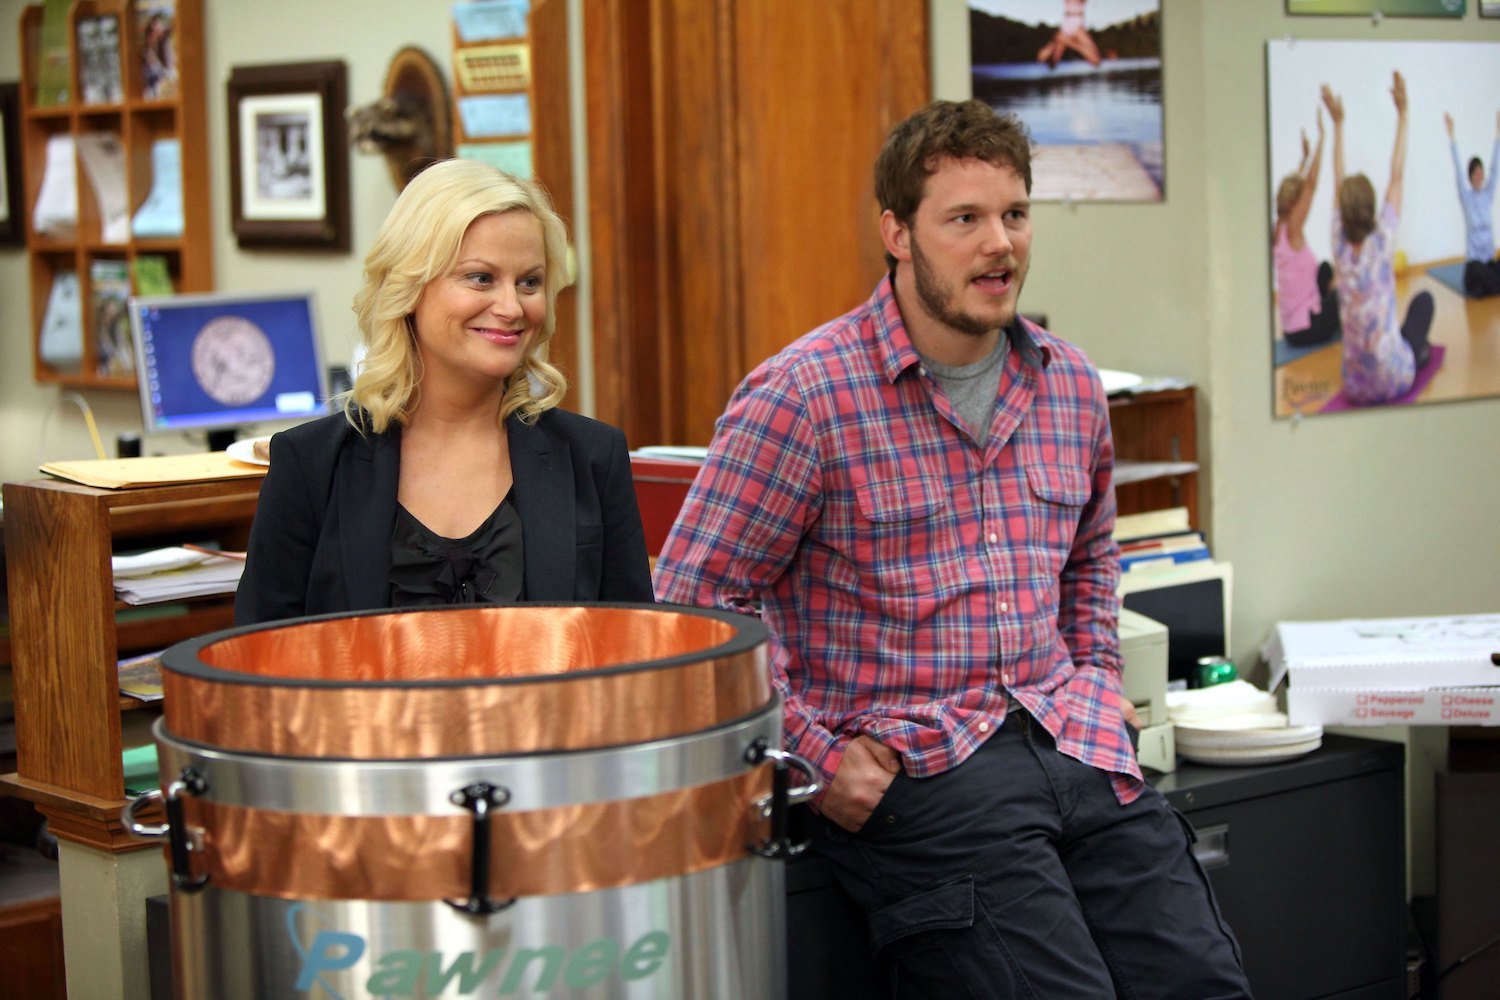 ‘Parks and Recreation’: The Amazing Moment That Left Chris Pratt ‘Covered in Goosebumps’